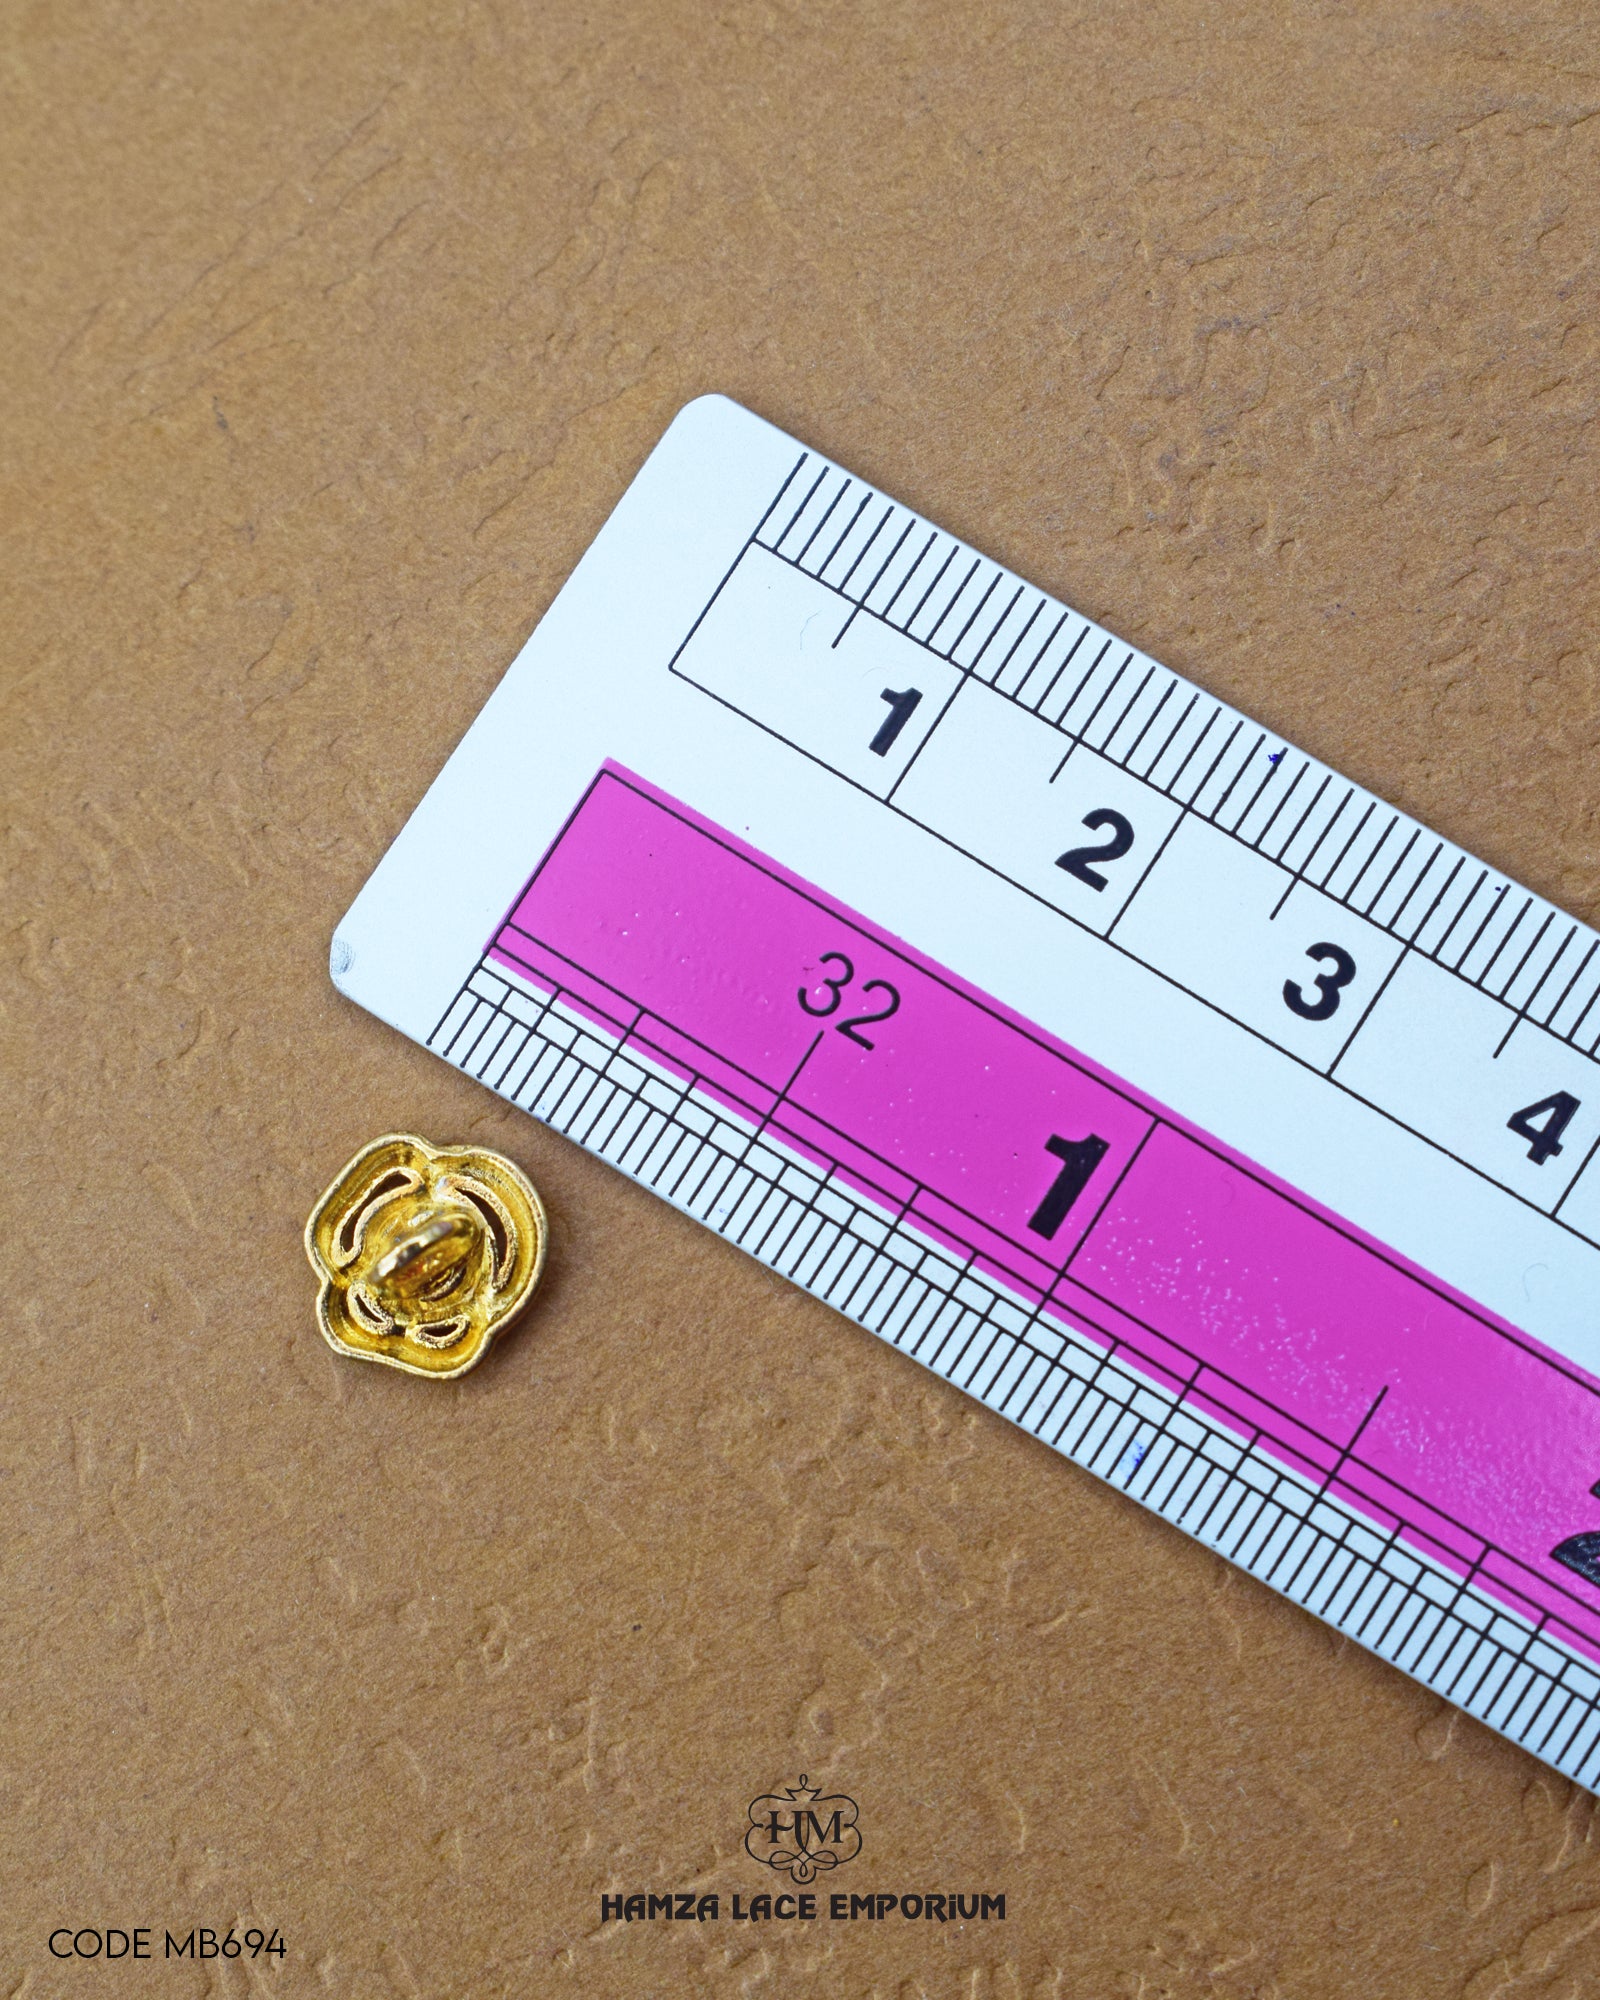 Size of the 'Flower Design Metal Button MB694' is given with the help of a ruler